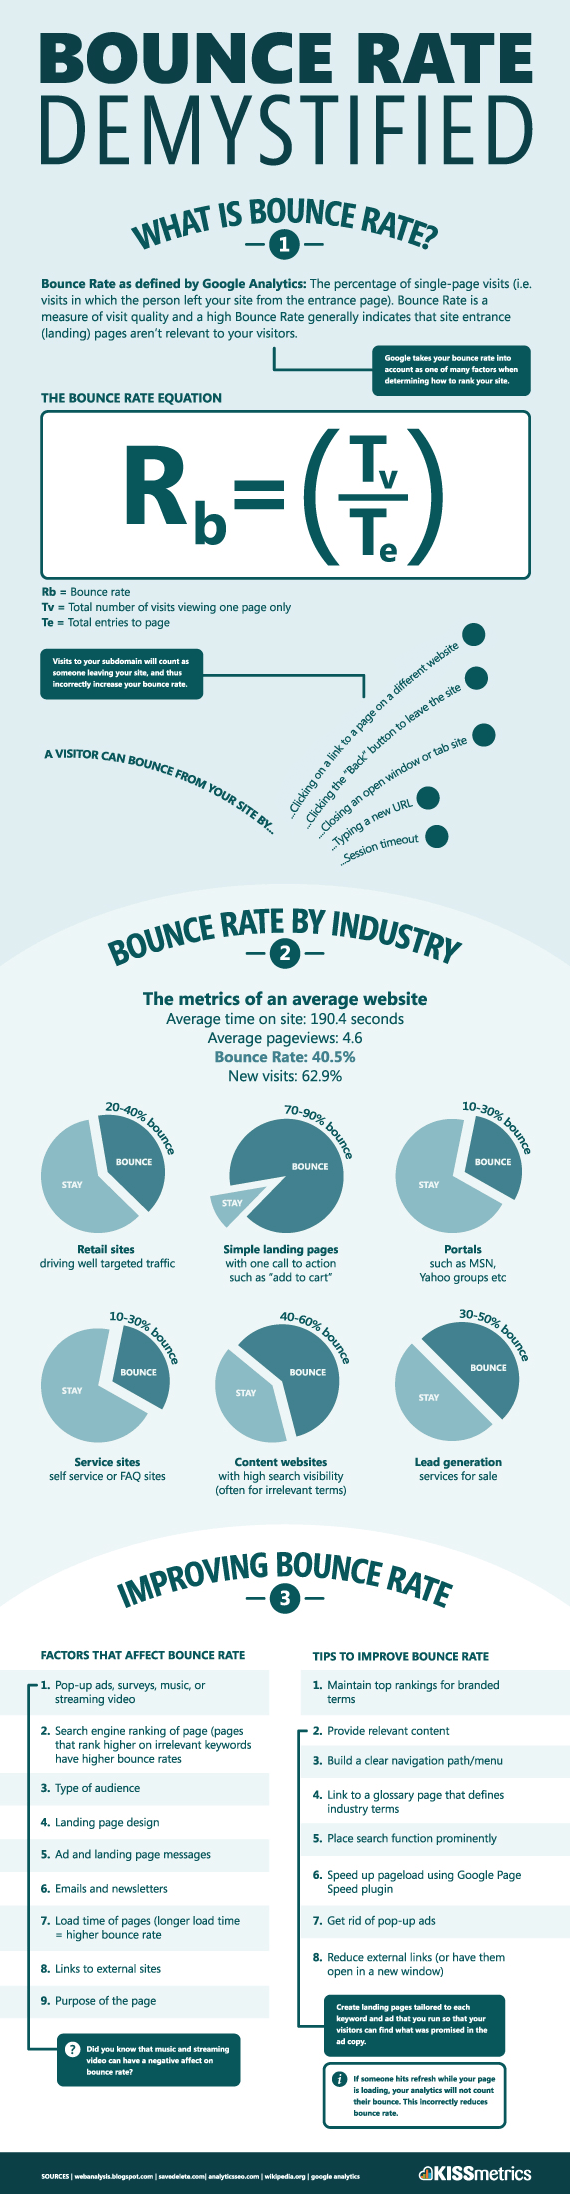 Demystifying Bounce Rate